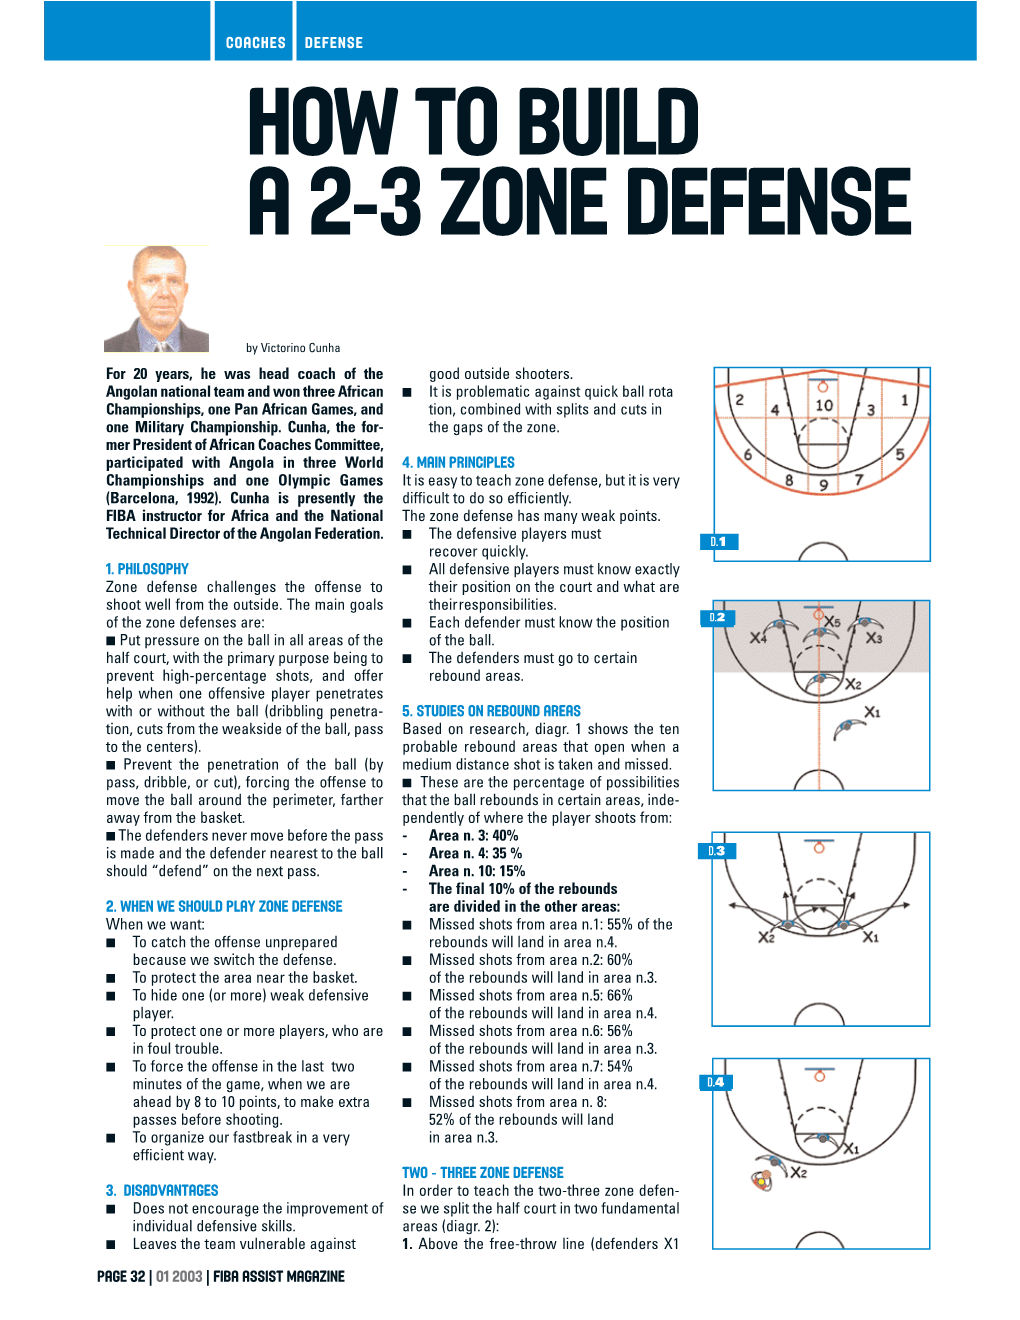 How to Build a 2-3 Zone Defense